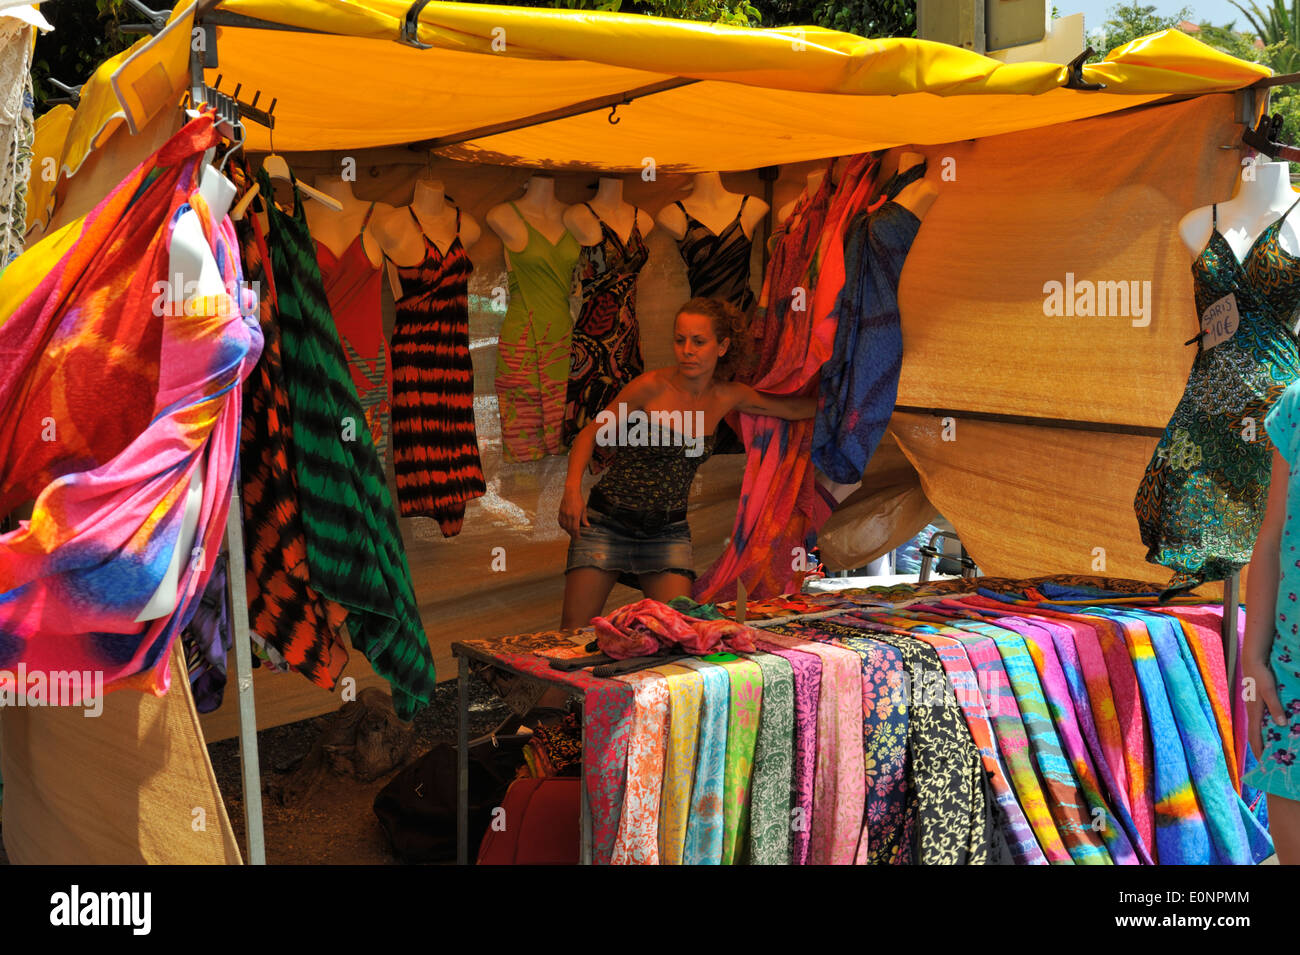 Outdoor market stall selling scarves and dresses Stock Photo